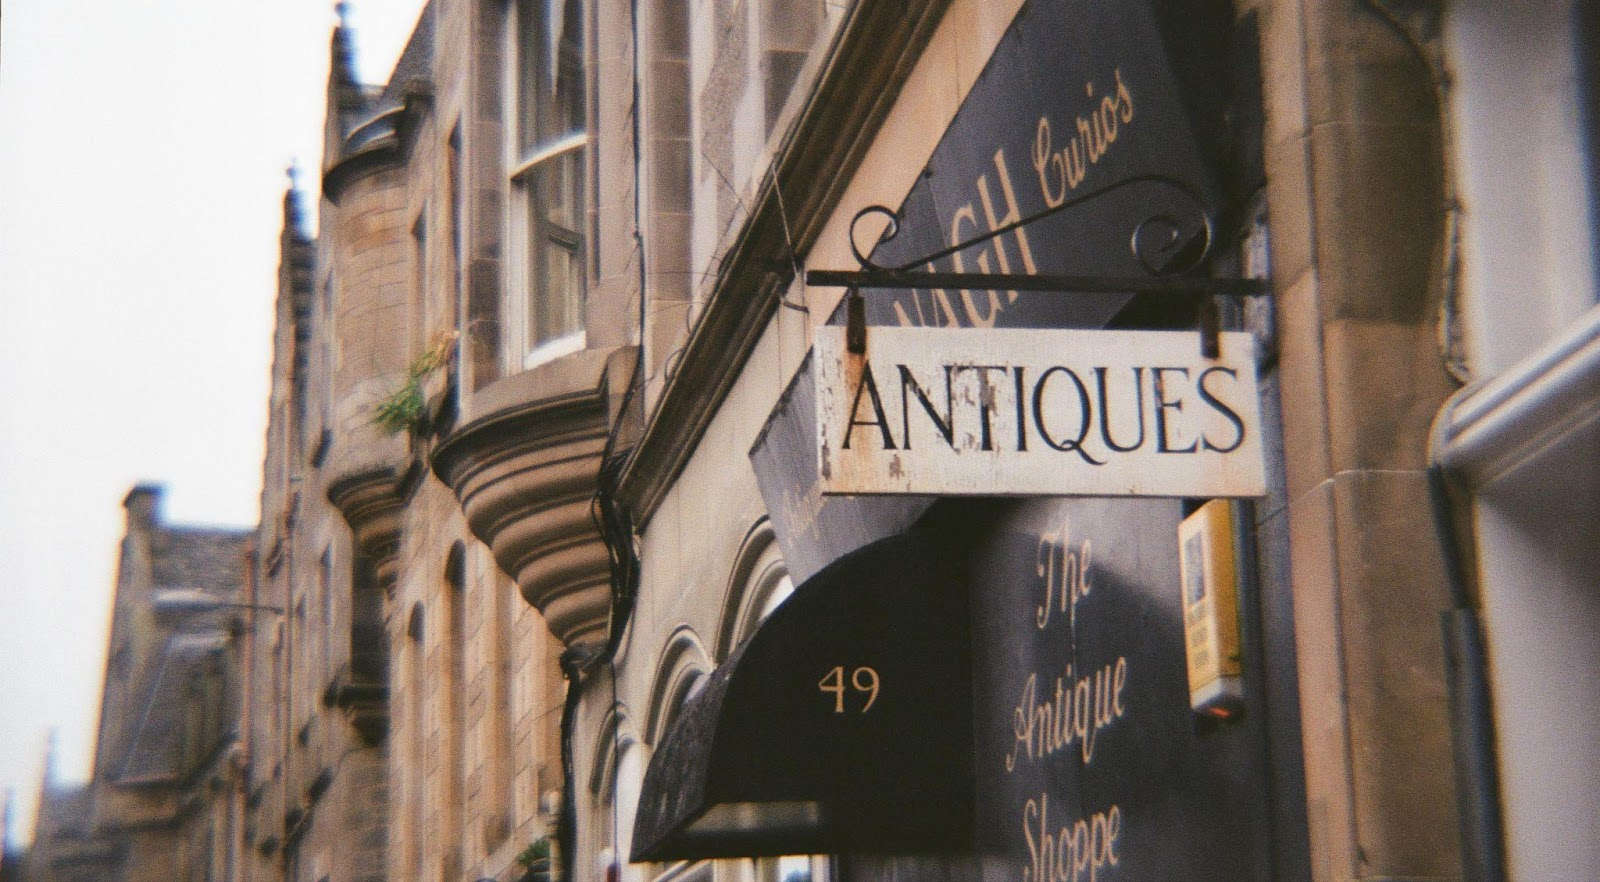 How to get your antiques valued: an in-depth guide to valuing antiques by Westland London